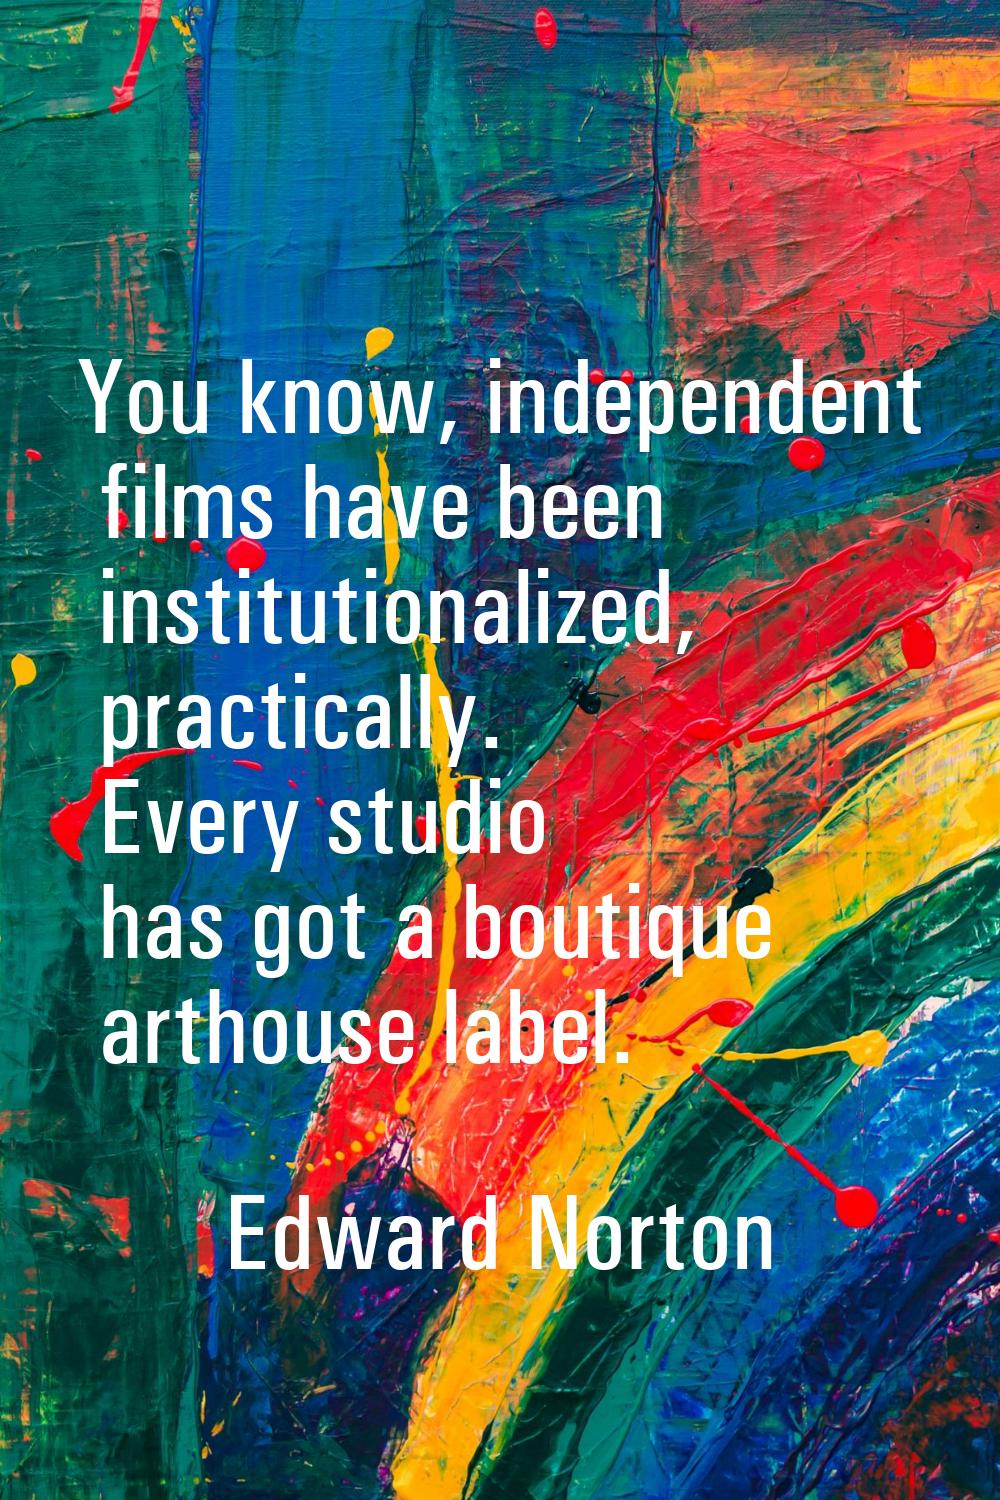 You know, independent films have been institutionalized, practically. Every studio has got a boutiq